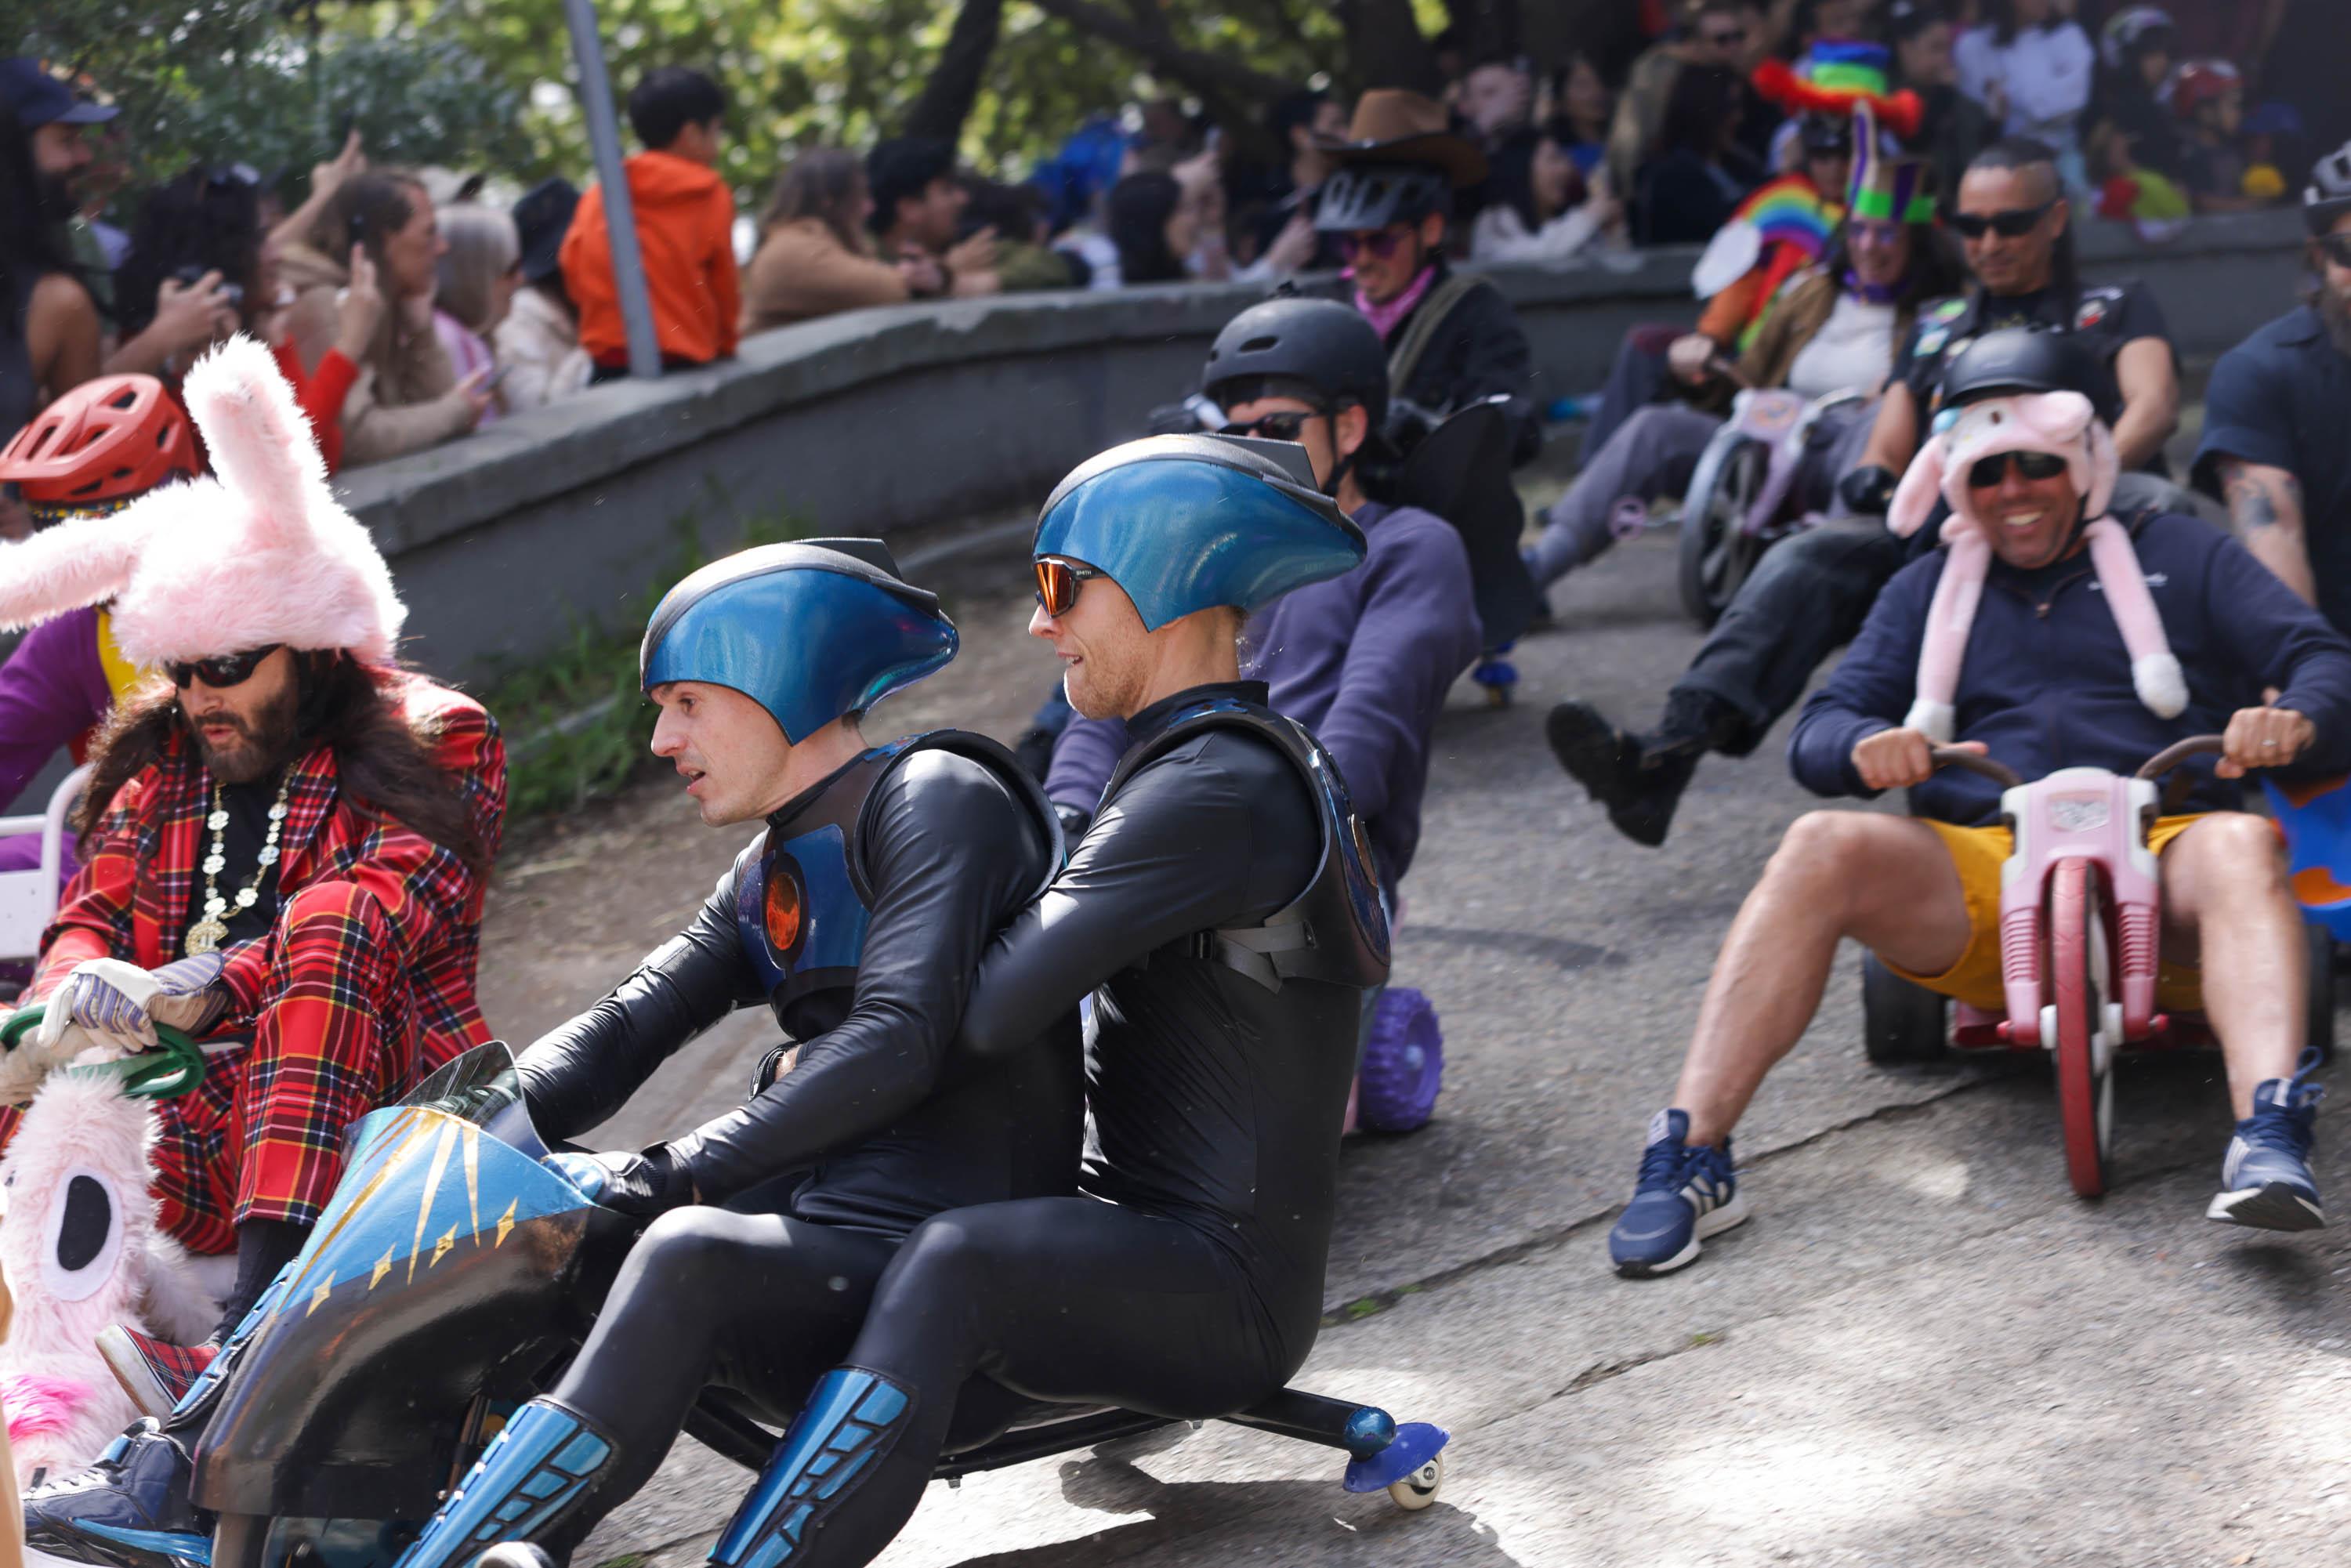 Adults in costumes race downhill on toy bikes; two are dressed as superheroes, others in playful outfits, amidst a watching crowd.